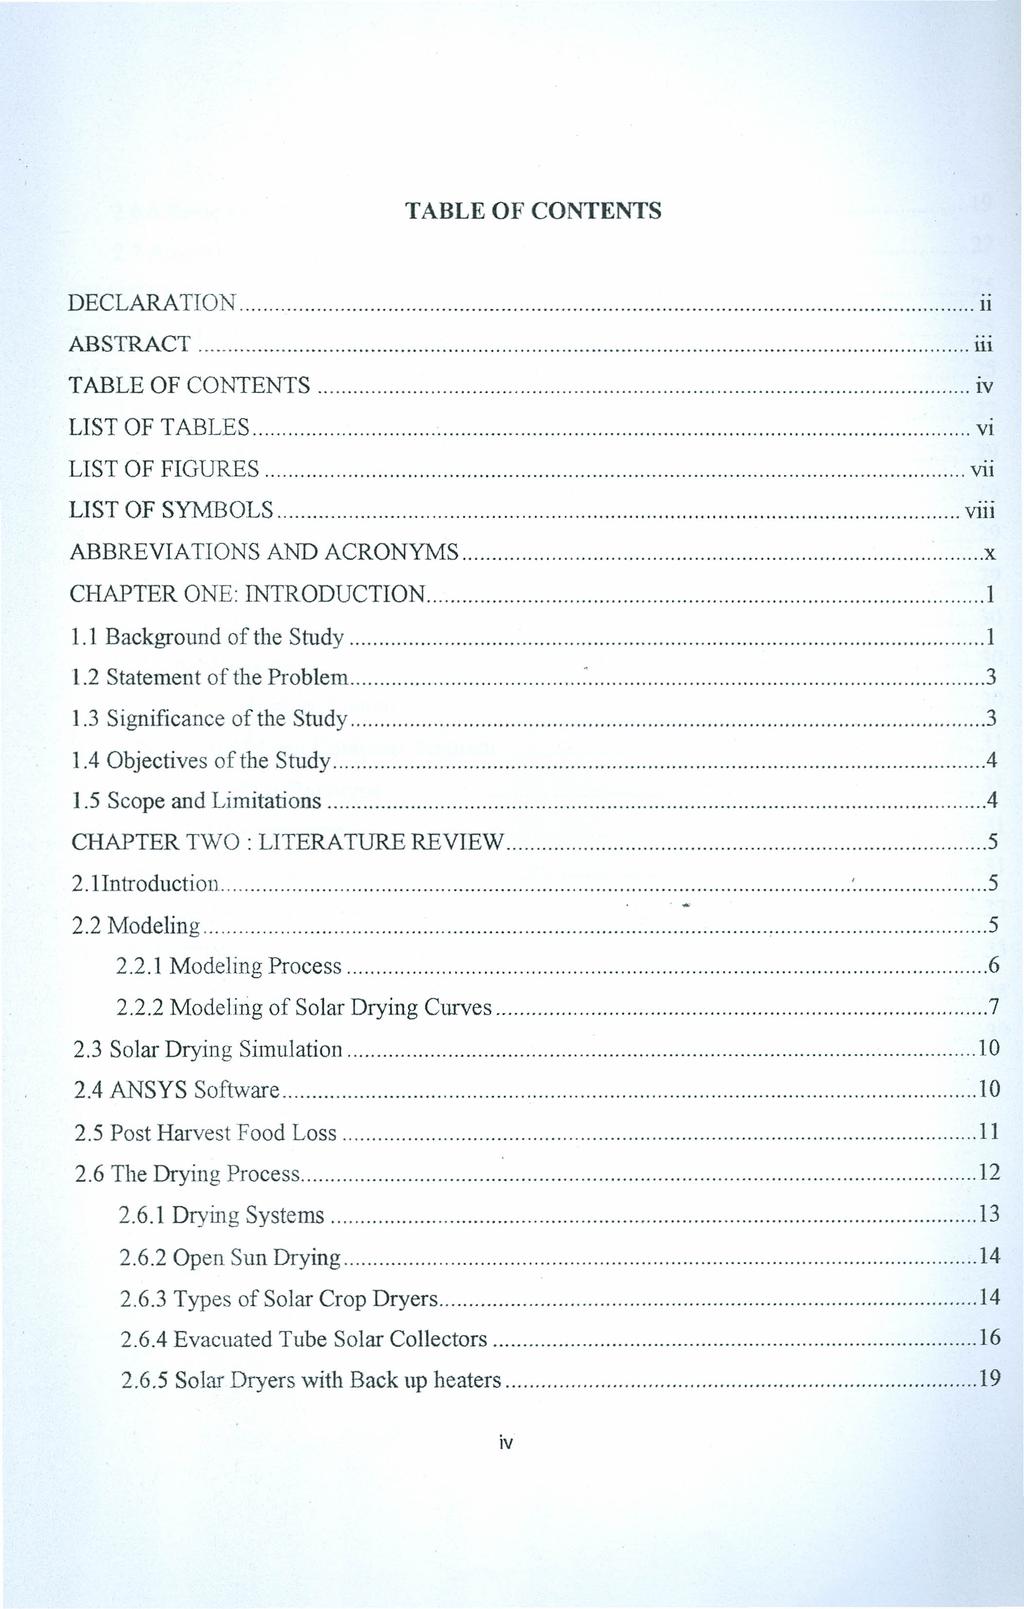 TABLE OF CONTENTS DECLARATION ii ABSTRACT iii TABLE OF CONTENTS iv LIST OF TABLES vi LIST OF FIGURES vii LIST OF S"YMBOLS viii ABBREVIATIONS AND ACRONYMS.x CHAPTER ONE: INTRODUCTION 1 1.